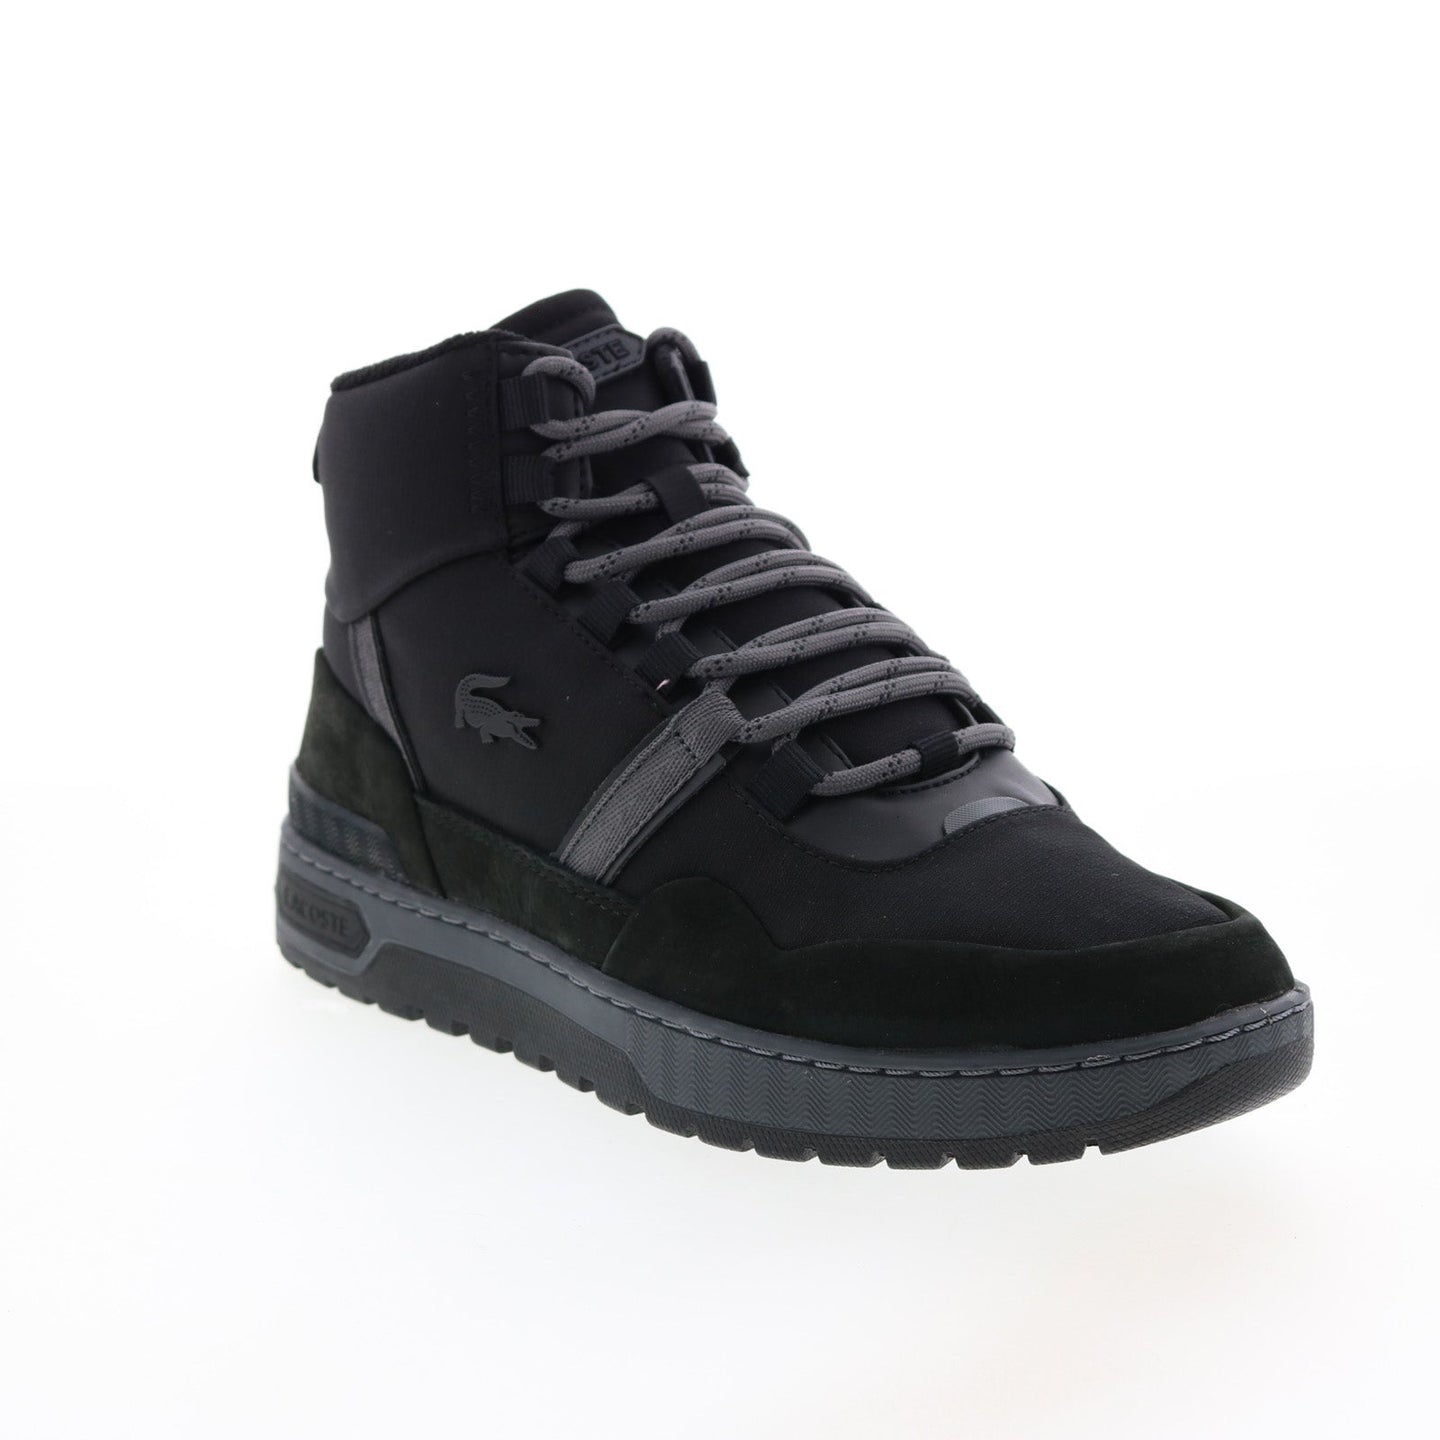 Lacoste T-Clip WNTR Mid 222 2 Mens Black Canvas Lifestyle Sneakers Sho ...